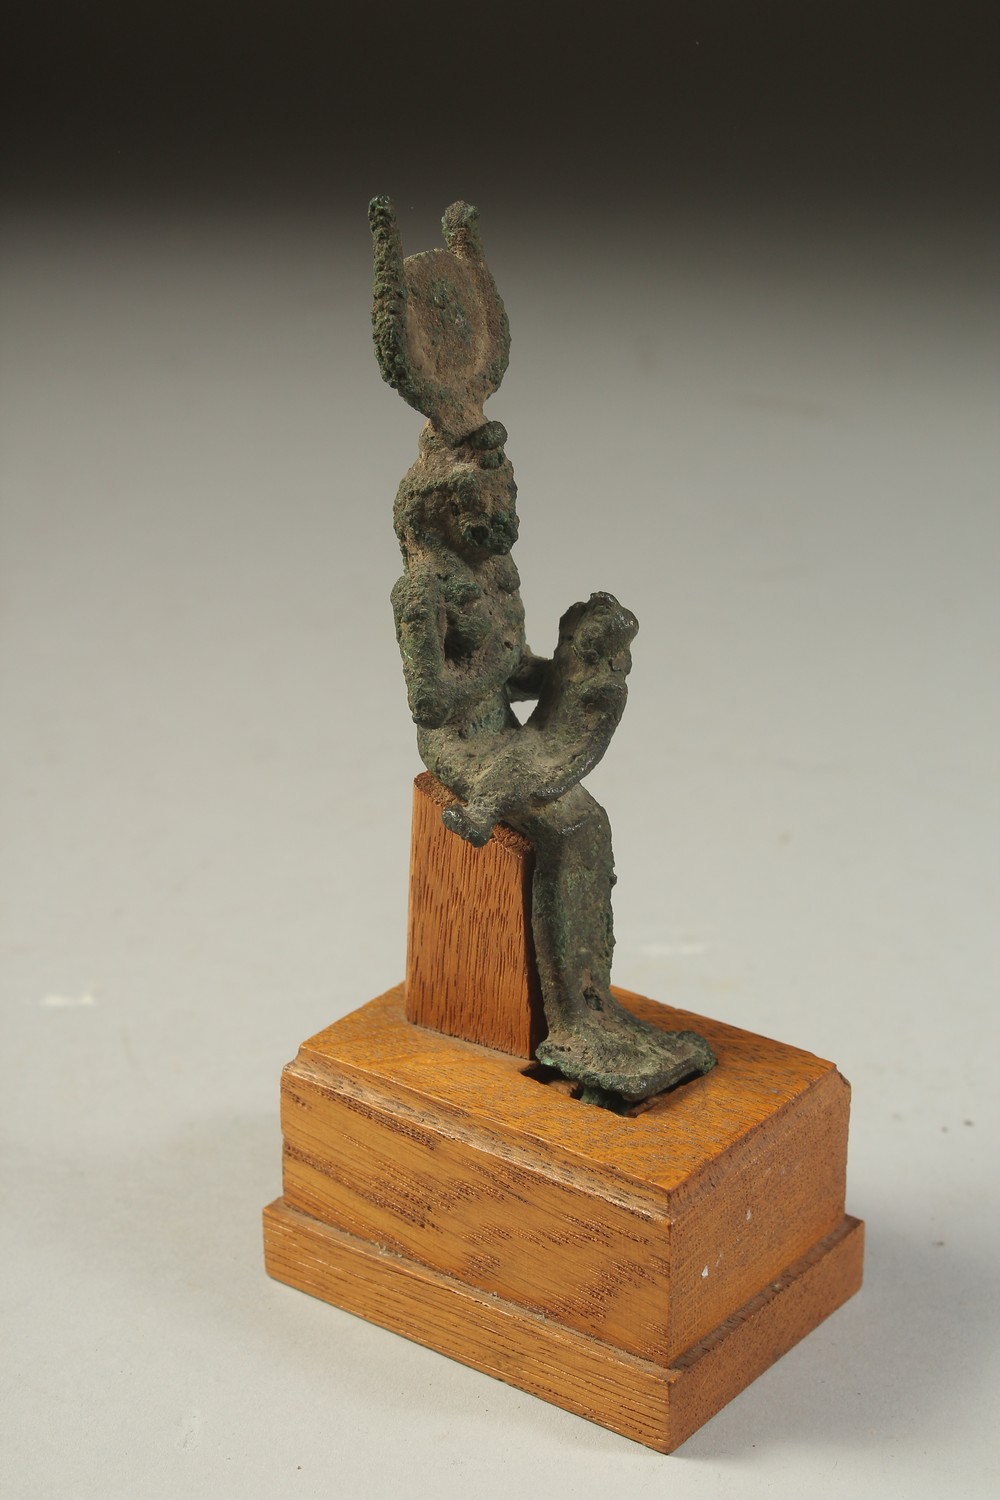 A RARE ANCIENT EYGPTIAN BRONZE FIGURE OF ISIS NURTURING HORUS, on a wooden stand, bronze 12cm high. - Image 2 of 4